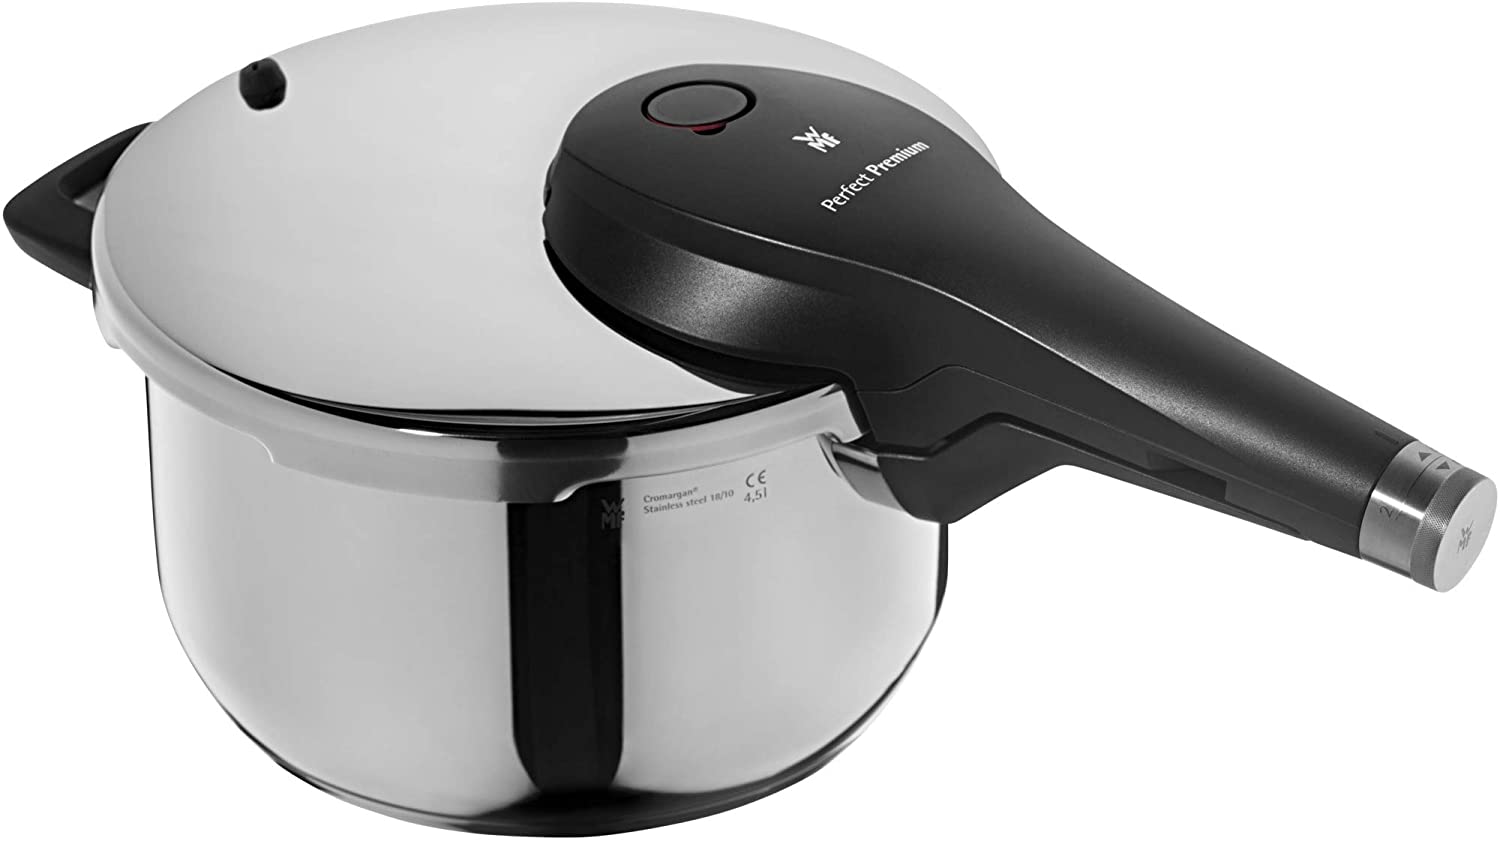 WMF Perfect Pressure Cooker 4.5 L Premium Polished Stainless Steel 2 Cooking Levels All-in-One Rotary Knob, Dishwasher Safe, Diameter Suitable for Induction, Stainless Steel, Silver, 22 cm